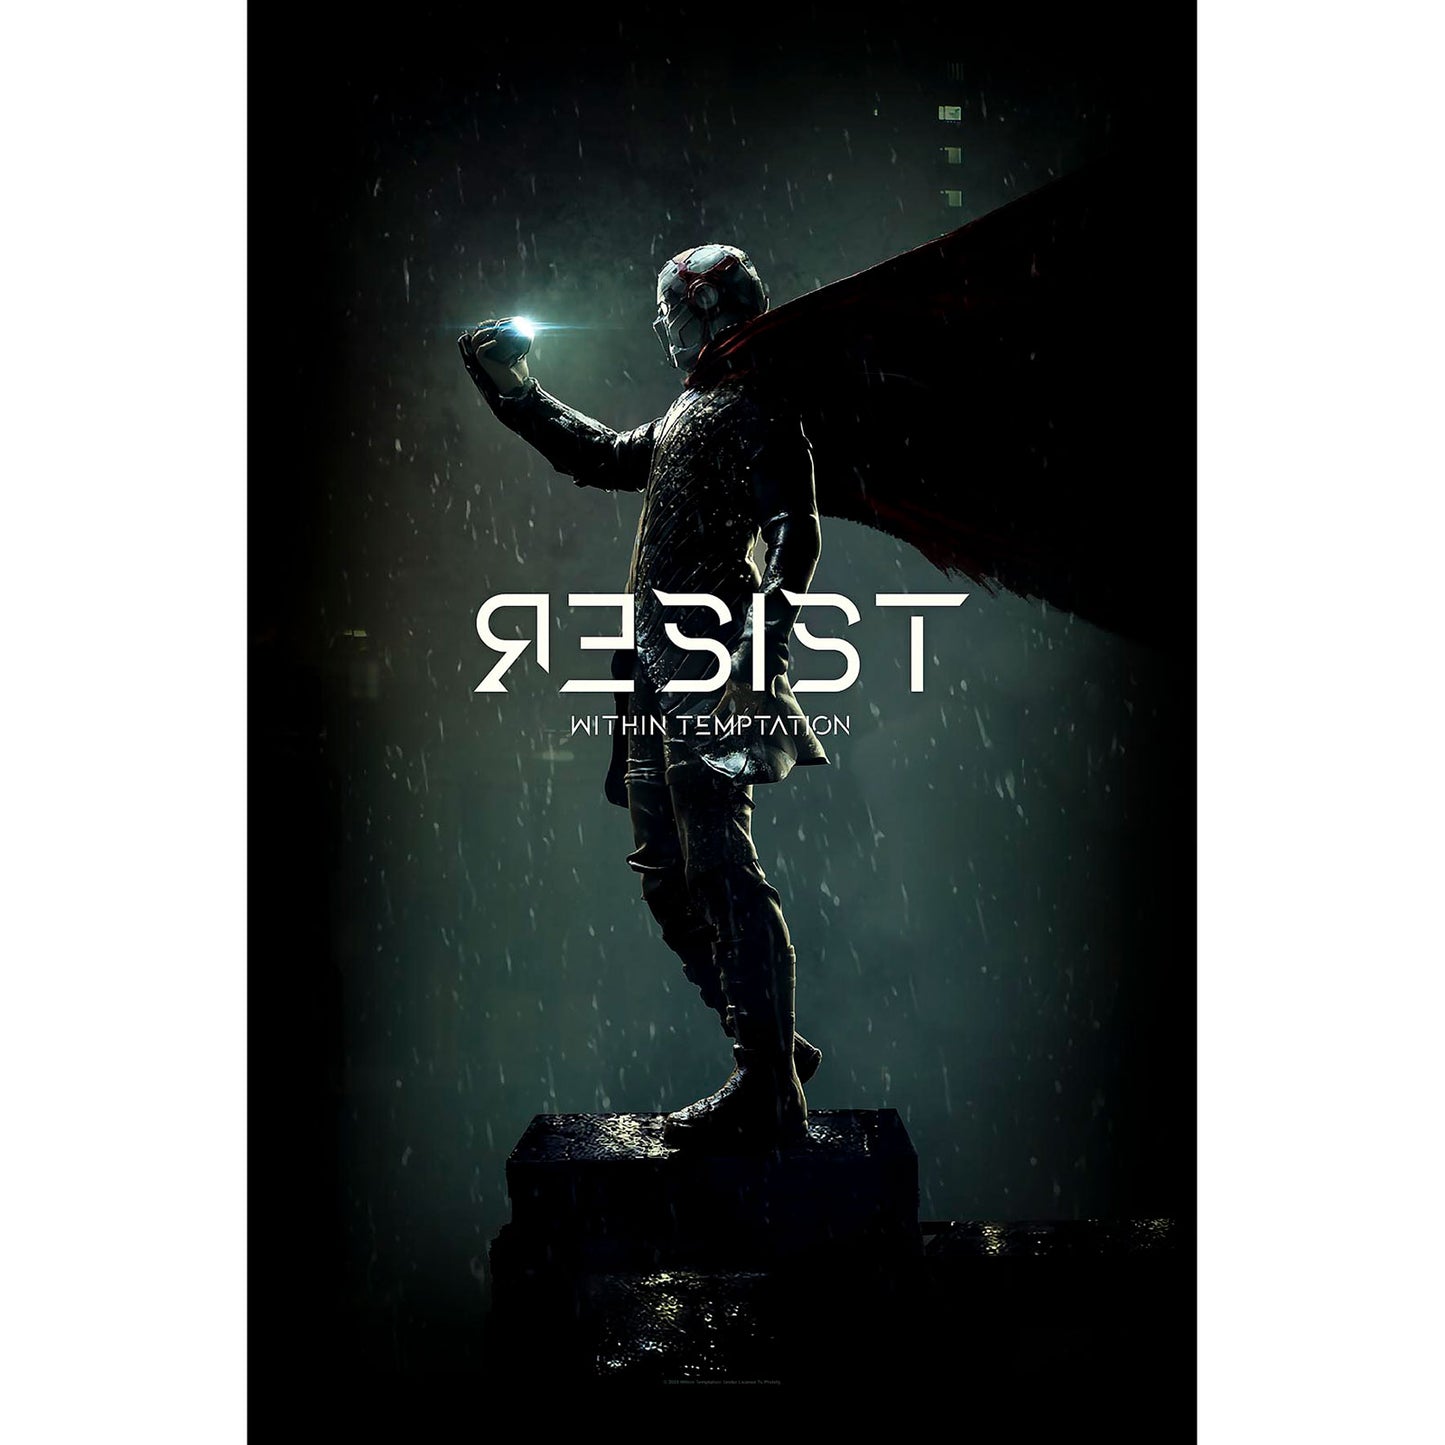 Within Temptation Textile Poster: Resist